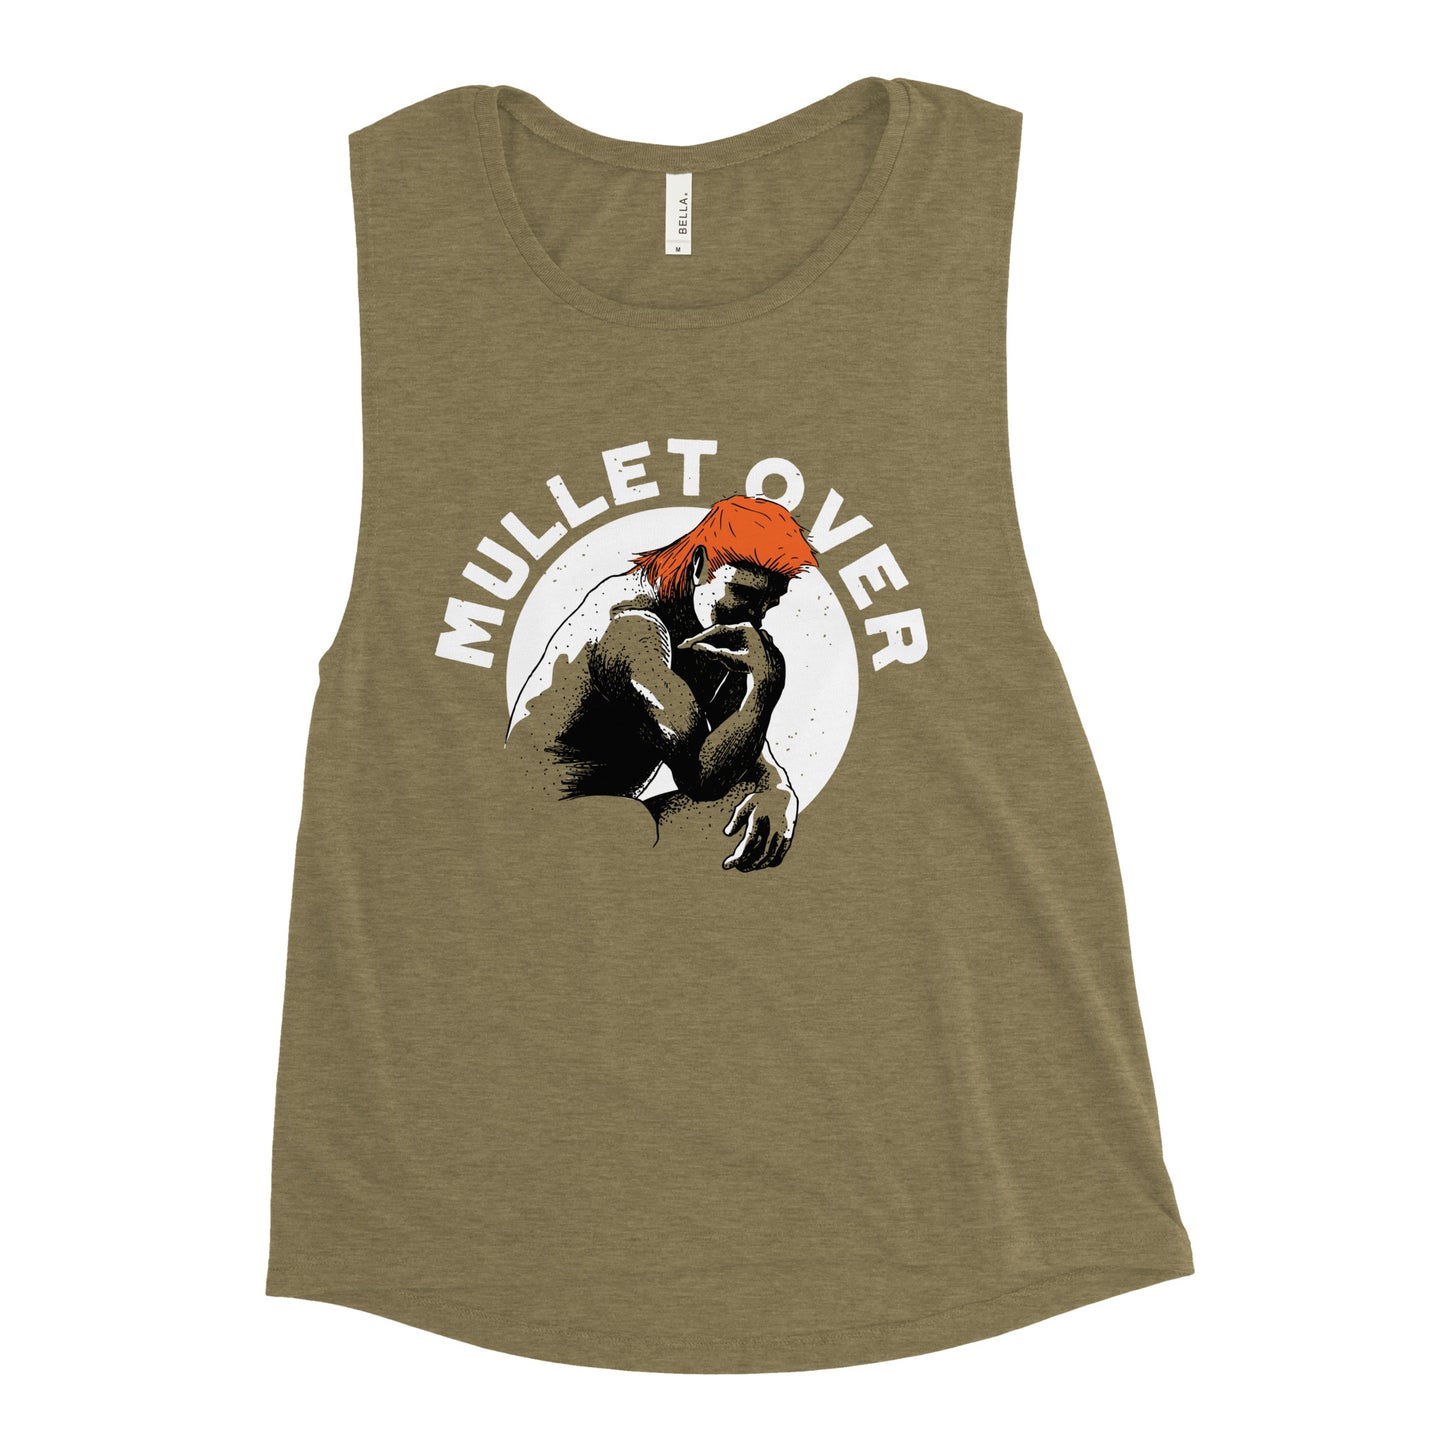 Mullet Over Women's Muscle Tank